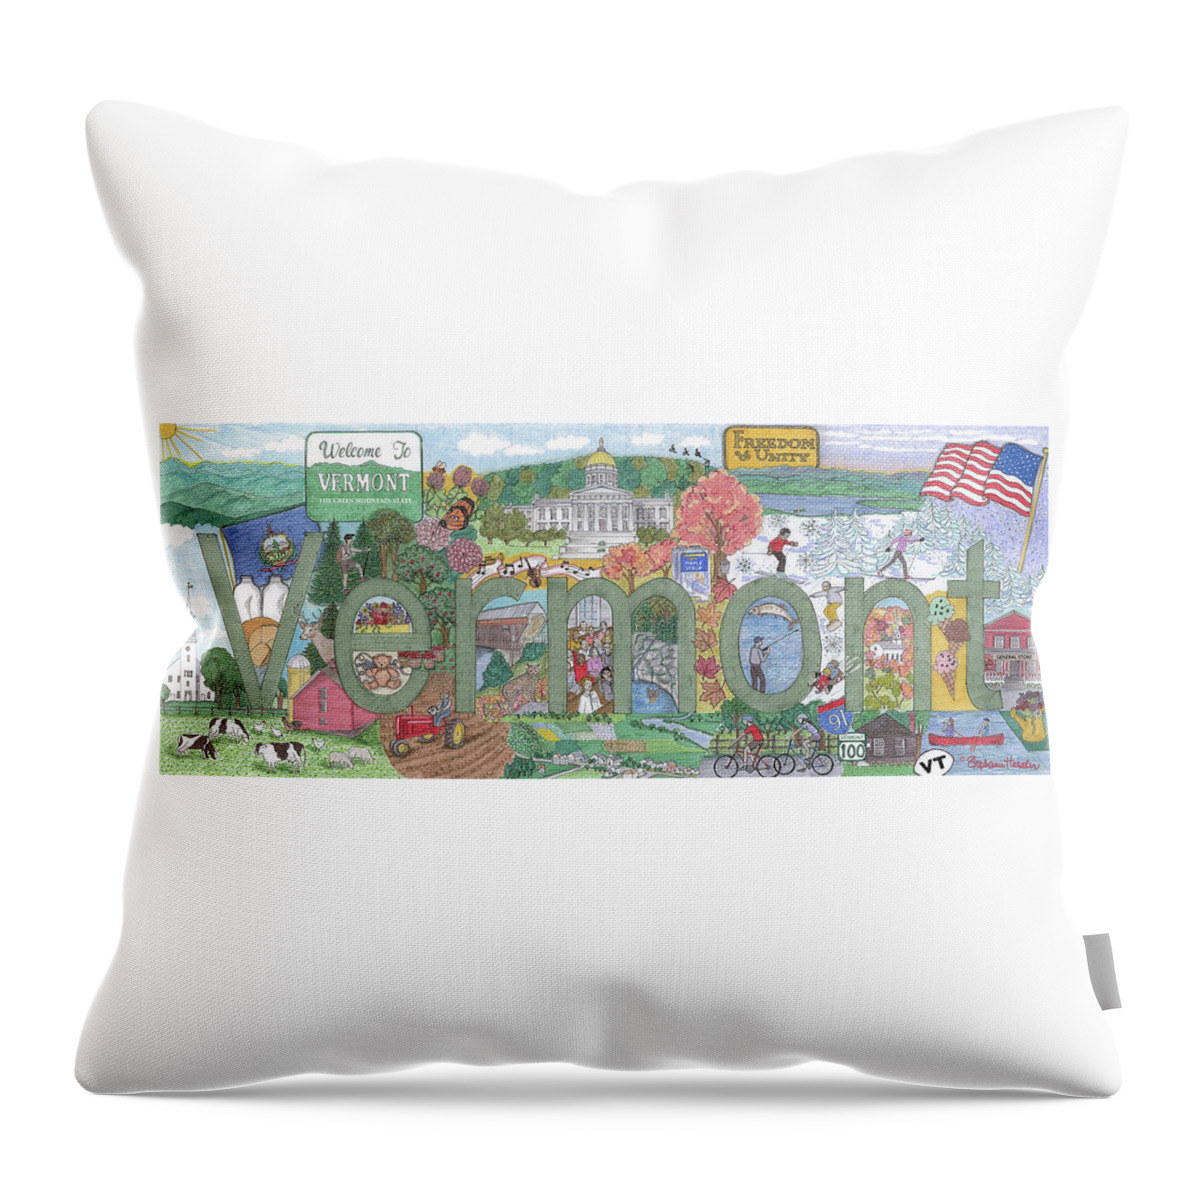 Vermont Throw Pillow featuring the mixed media Vermont by Stephanie Hessler